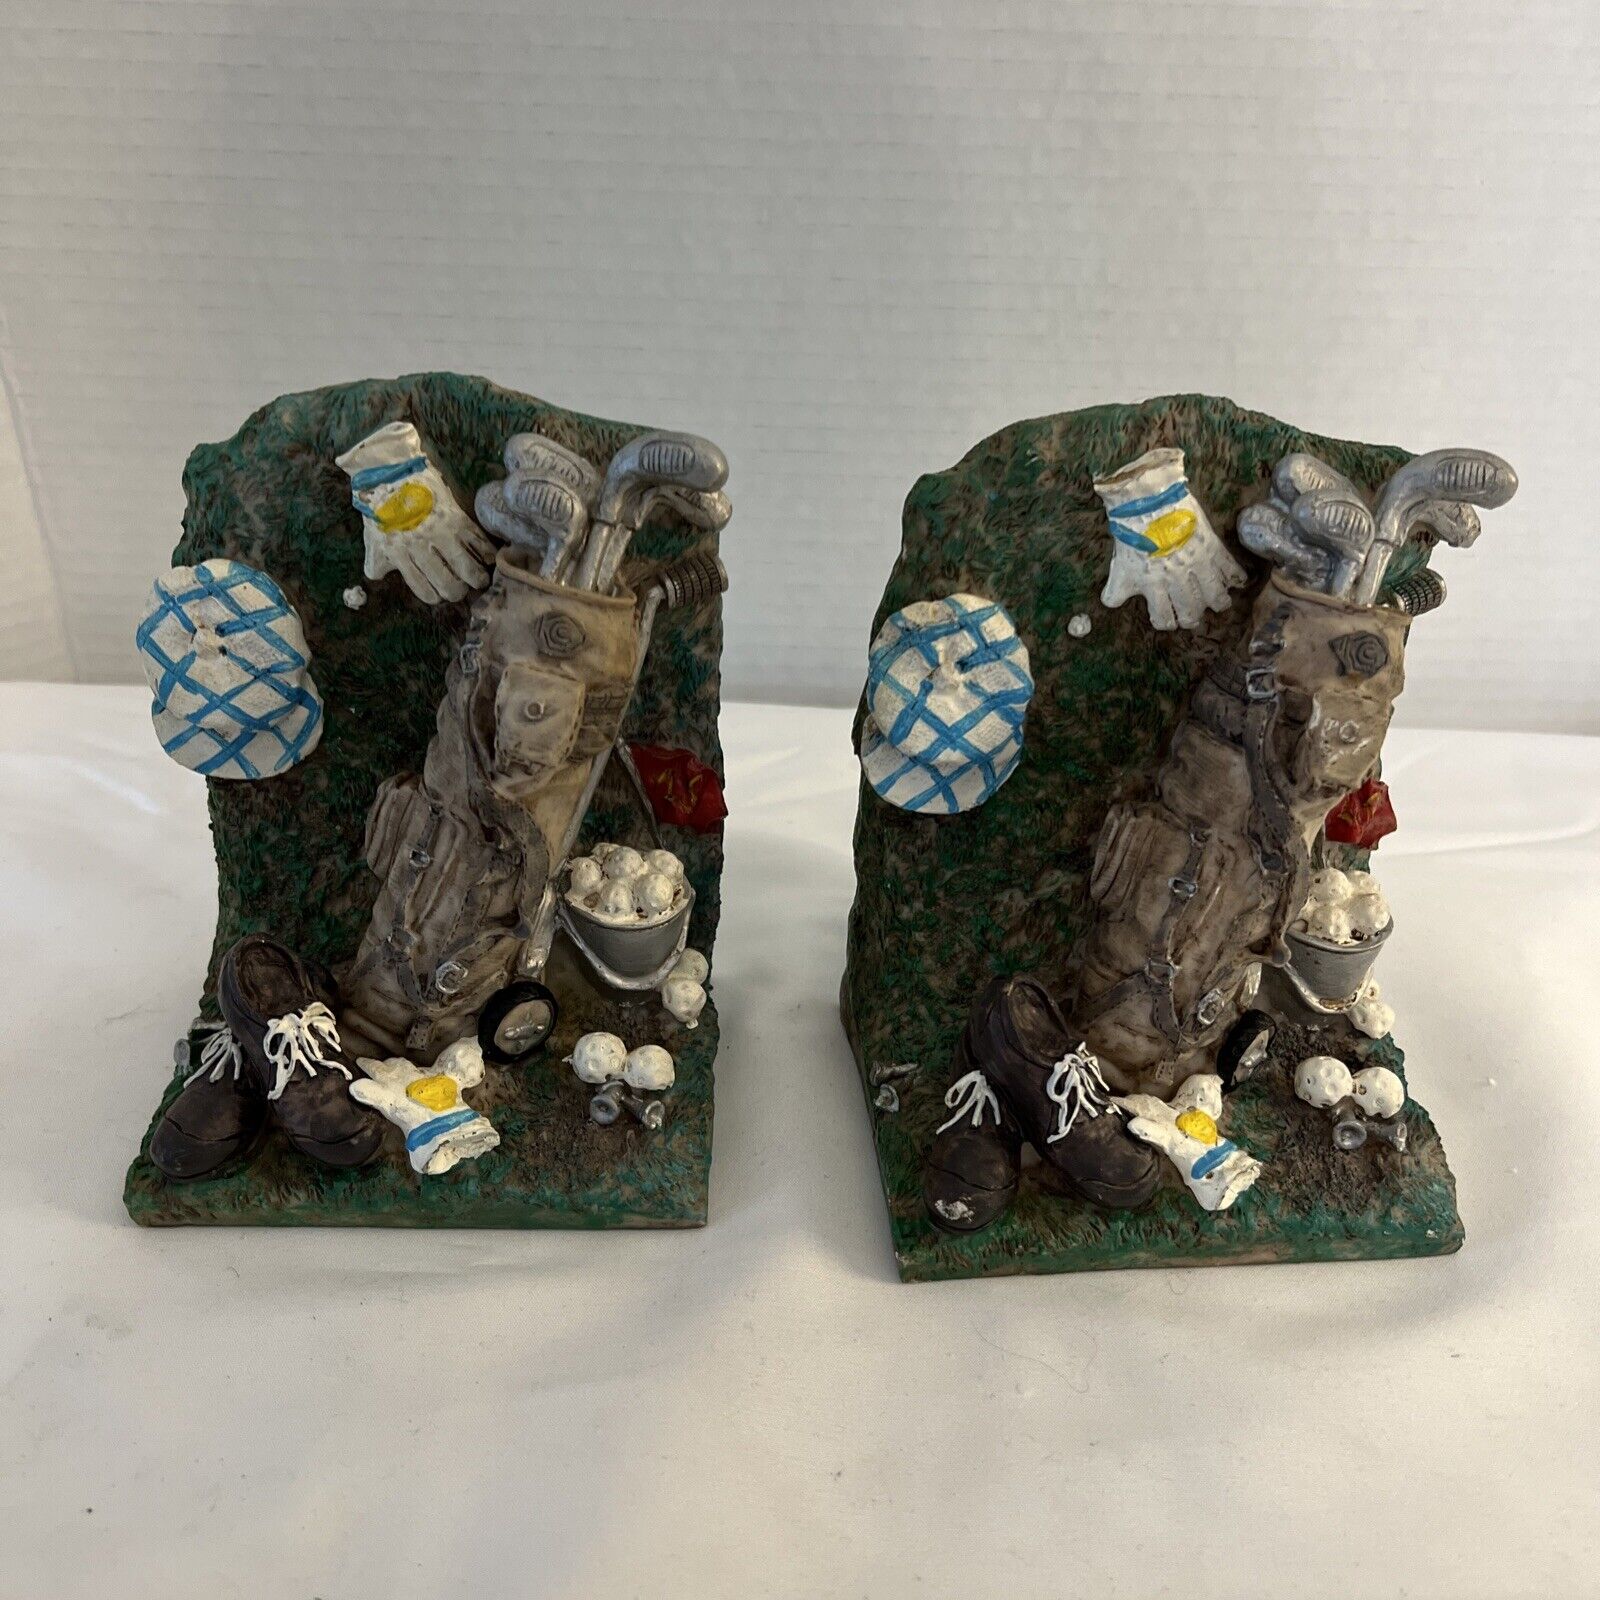 Vintage golf book ends made out of resin In Very Good Condition 5.5 In Tall